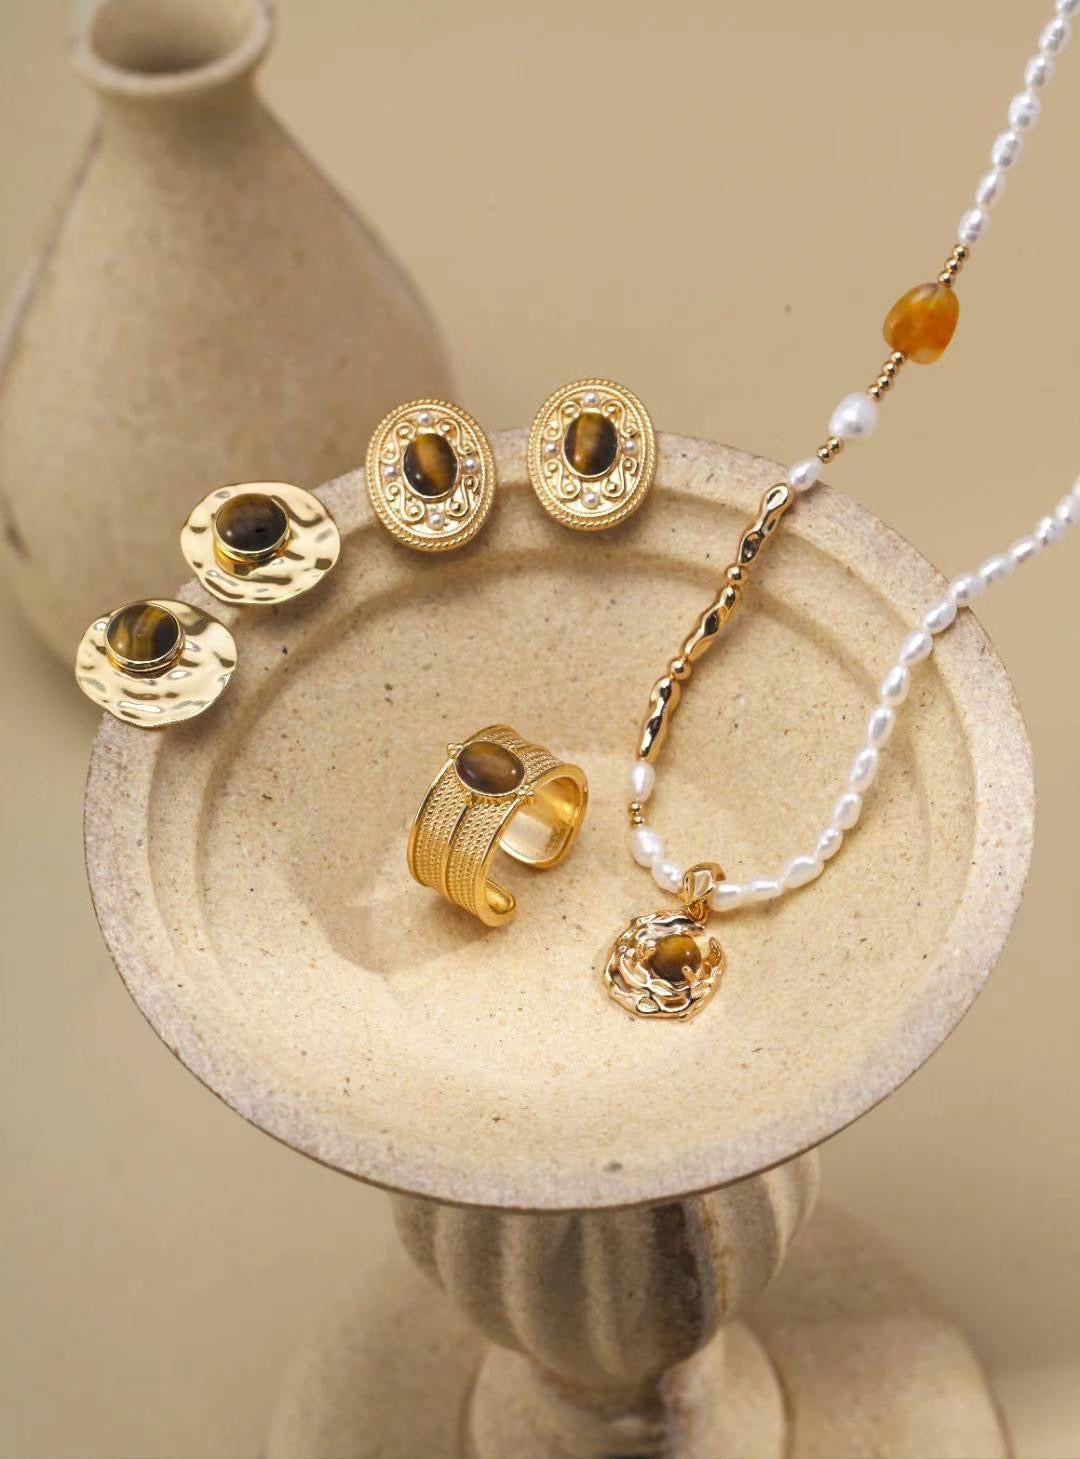 Tigers eye jewelry | pearl necklace | Tigers eye earrings and rings